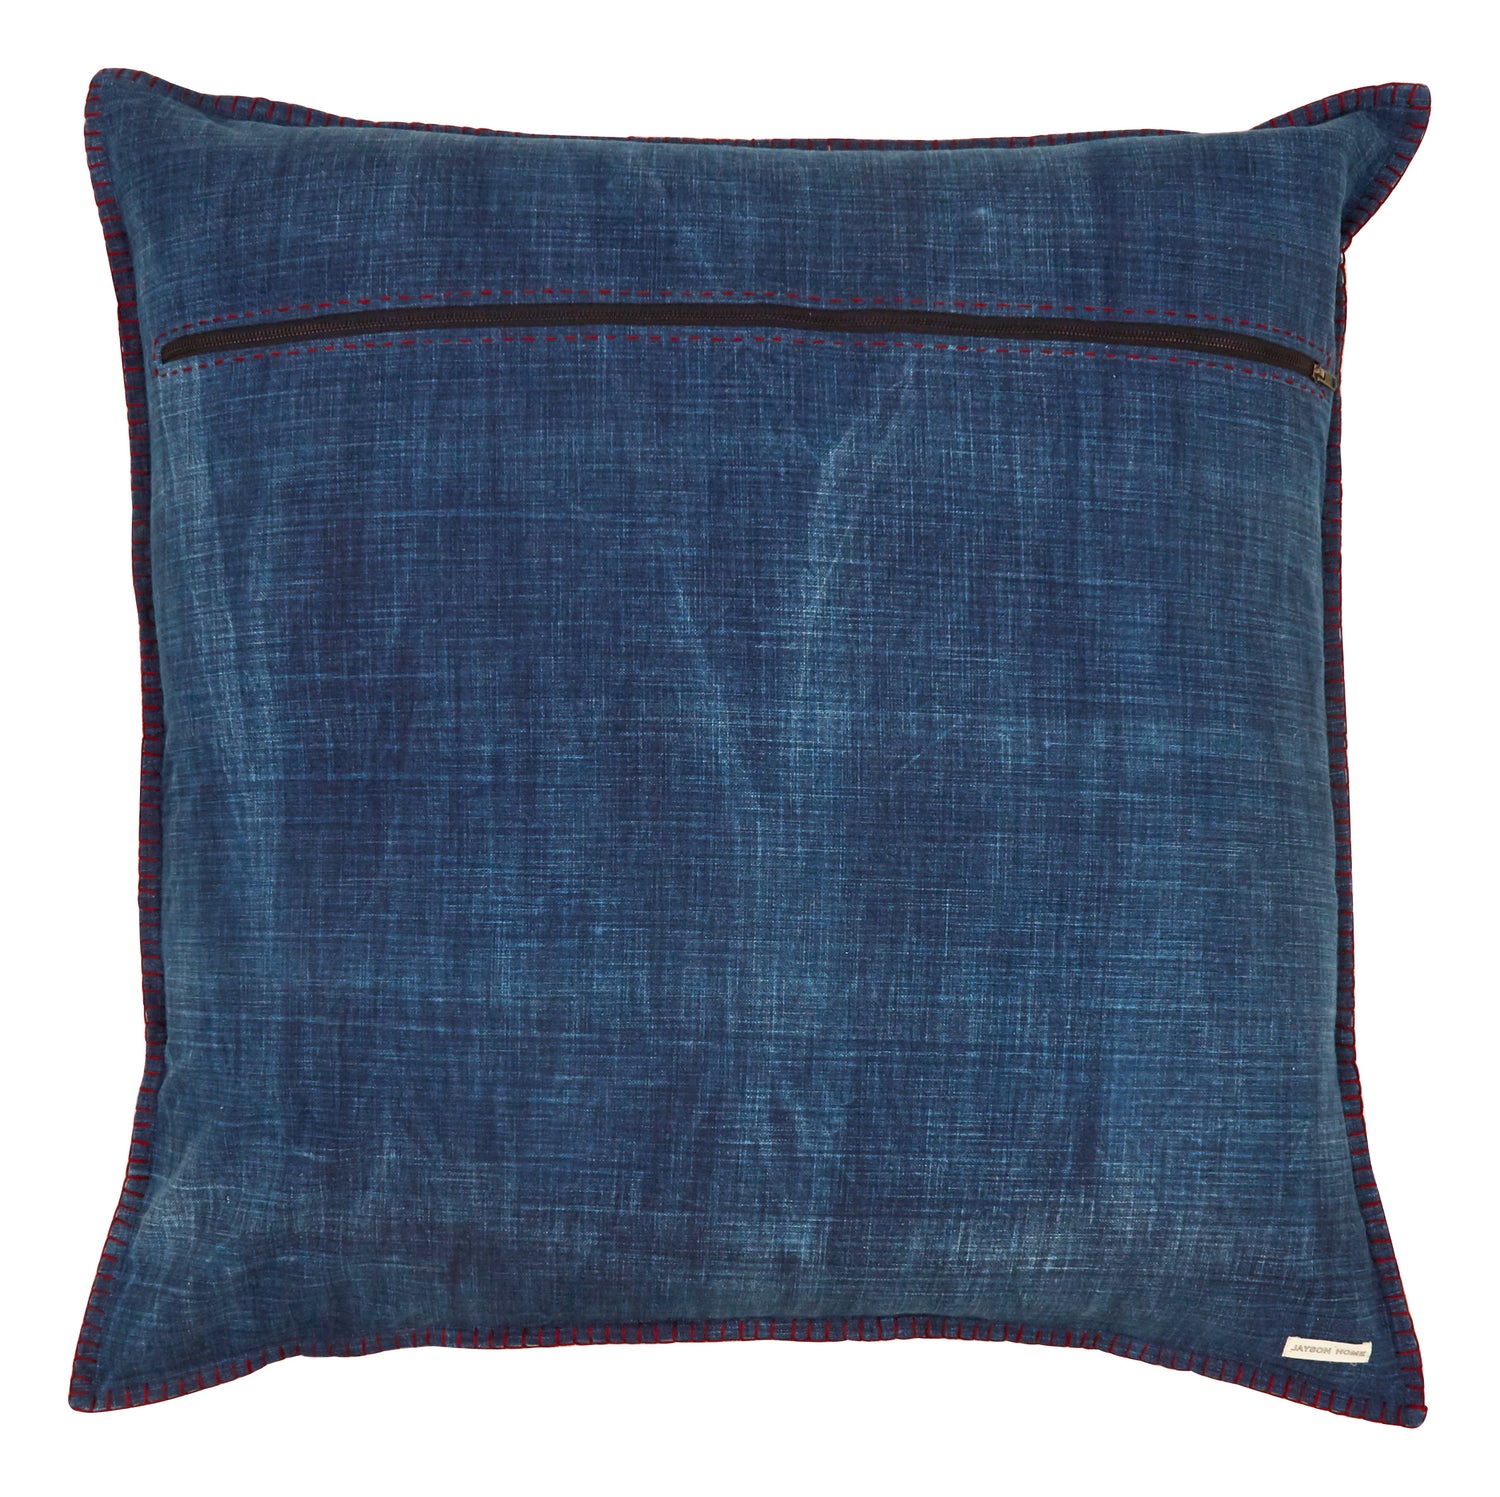 Linen Floor Cushion With Handle, Natural Blue